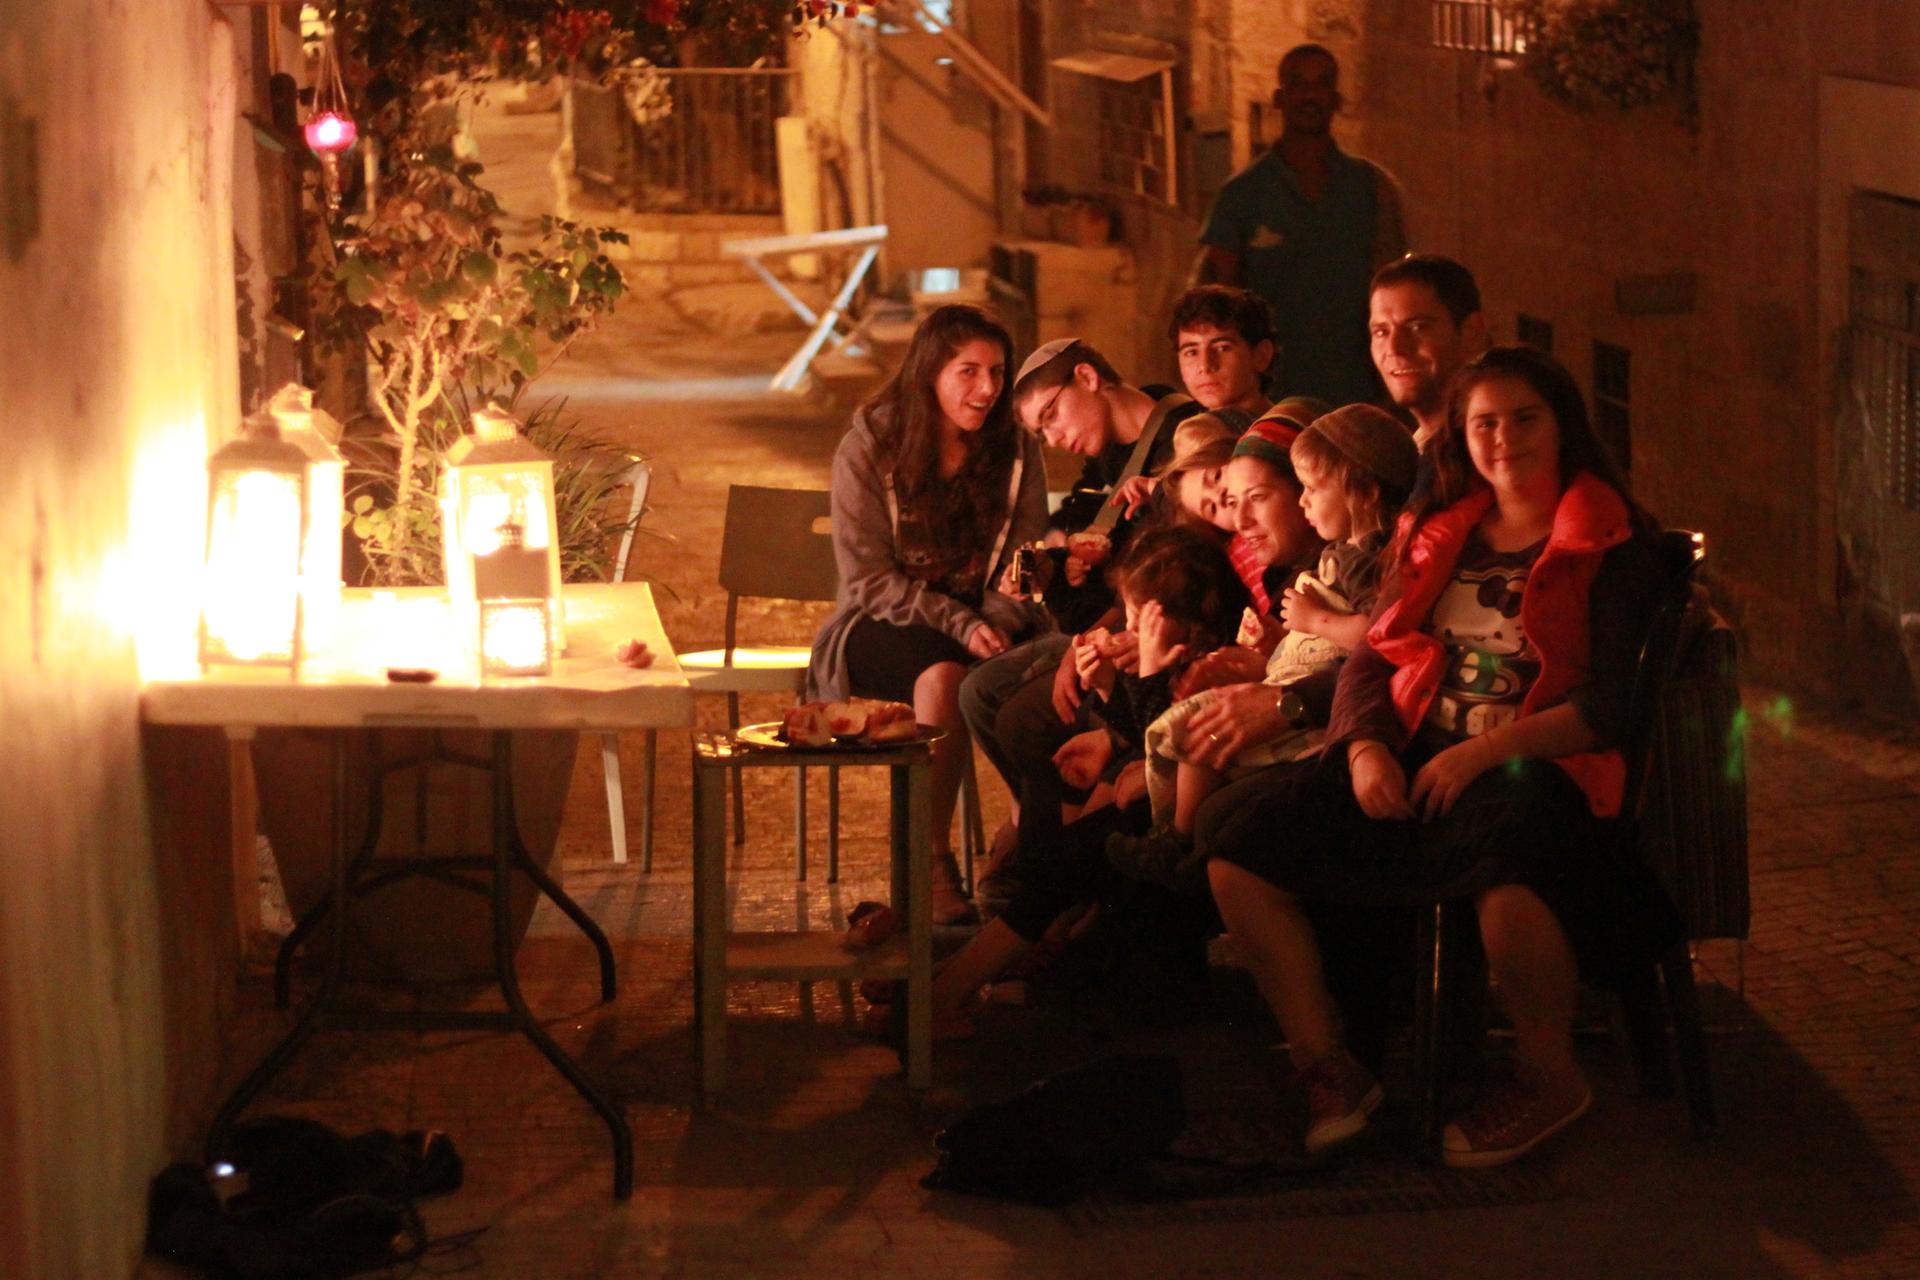 The Van Leeuwen family sits in front of the menorahs and sings.